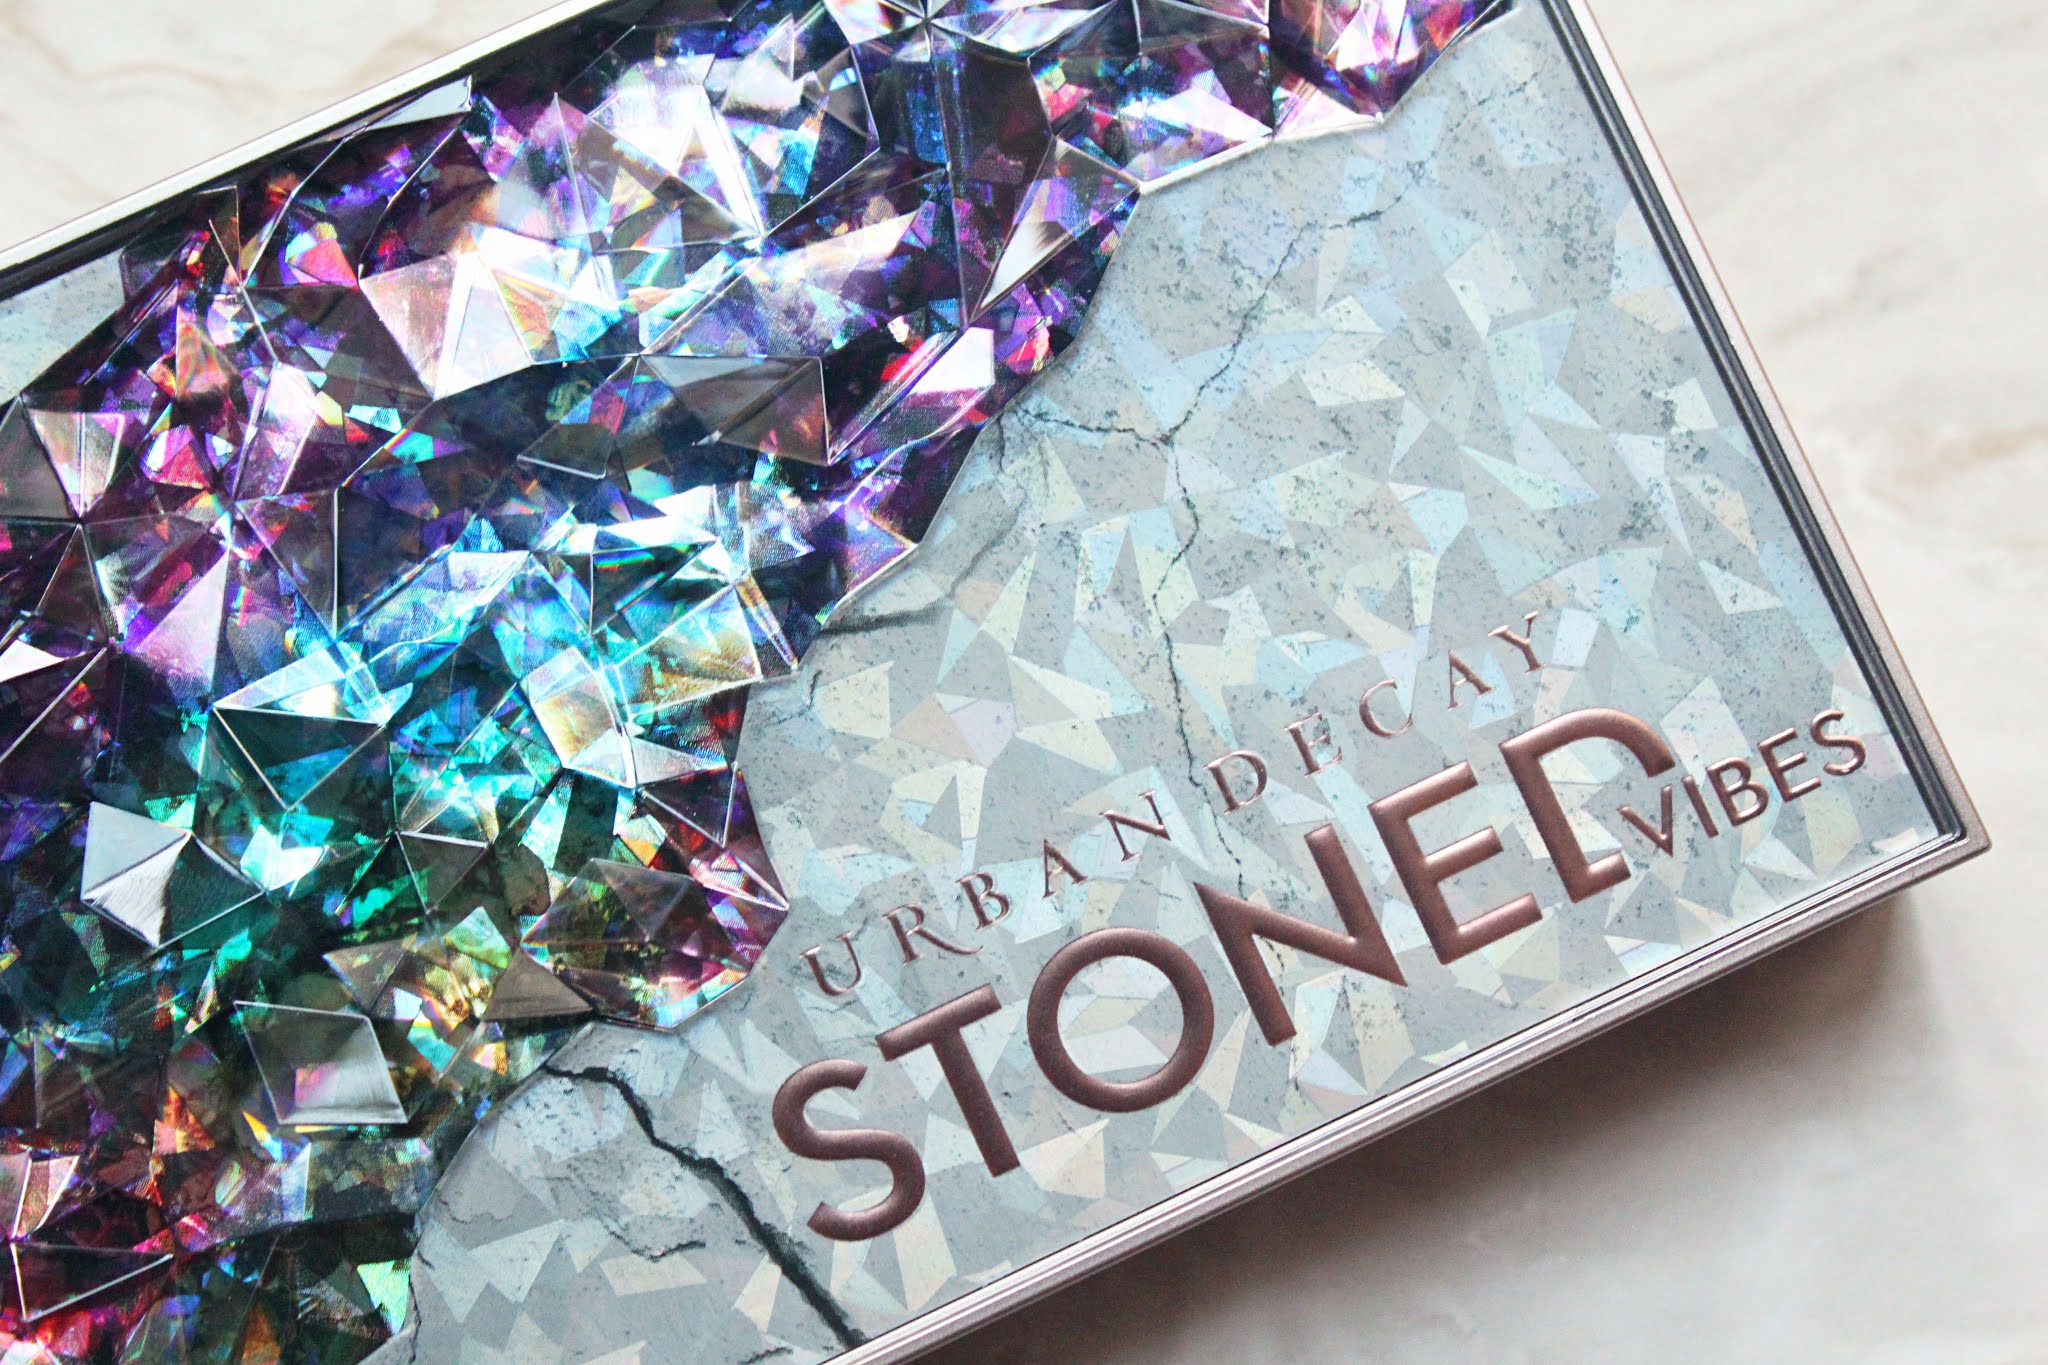 Urban Decay Stoned Vibes Eyeshadow Palette Review & Swatches